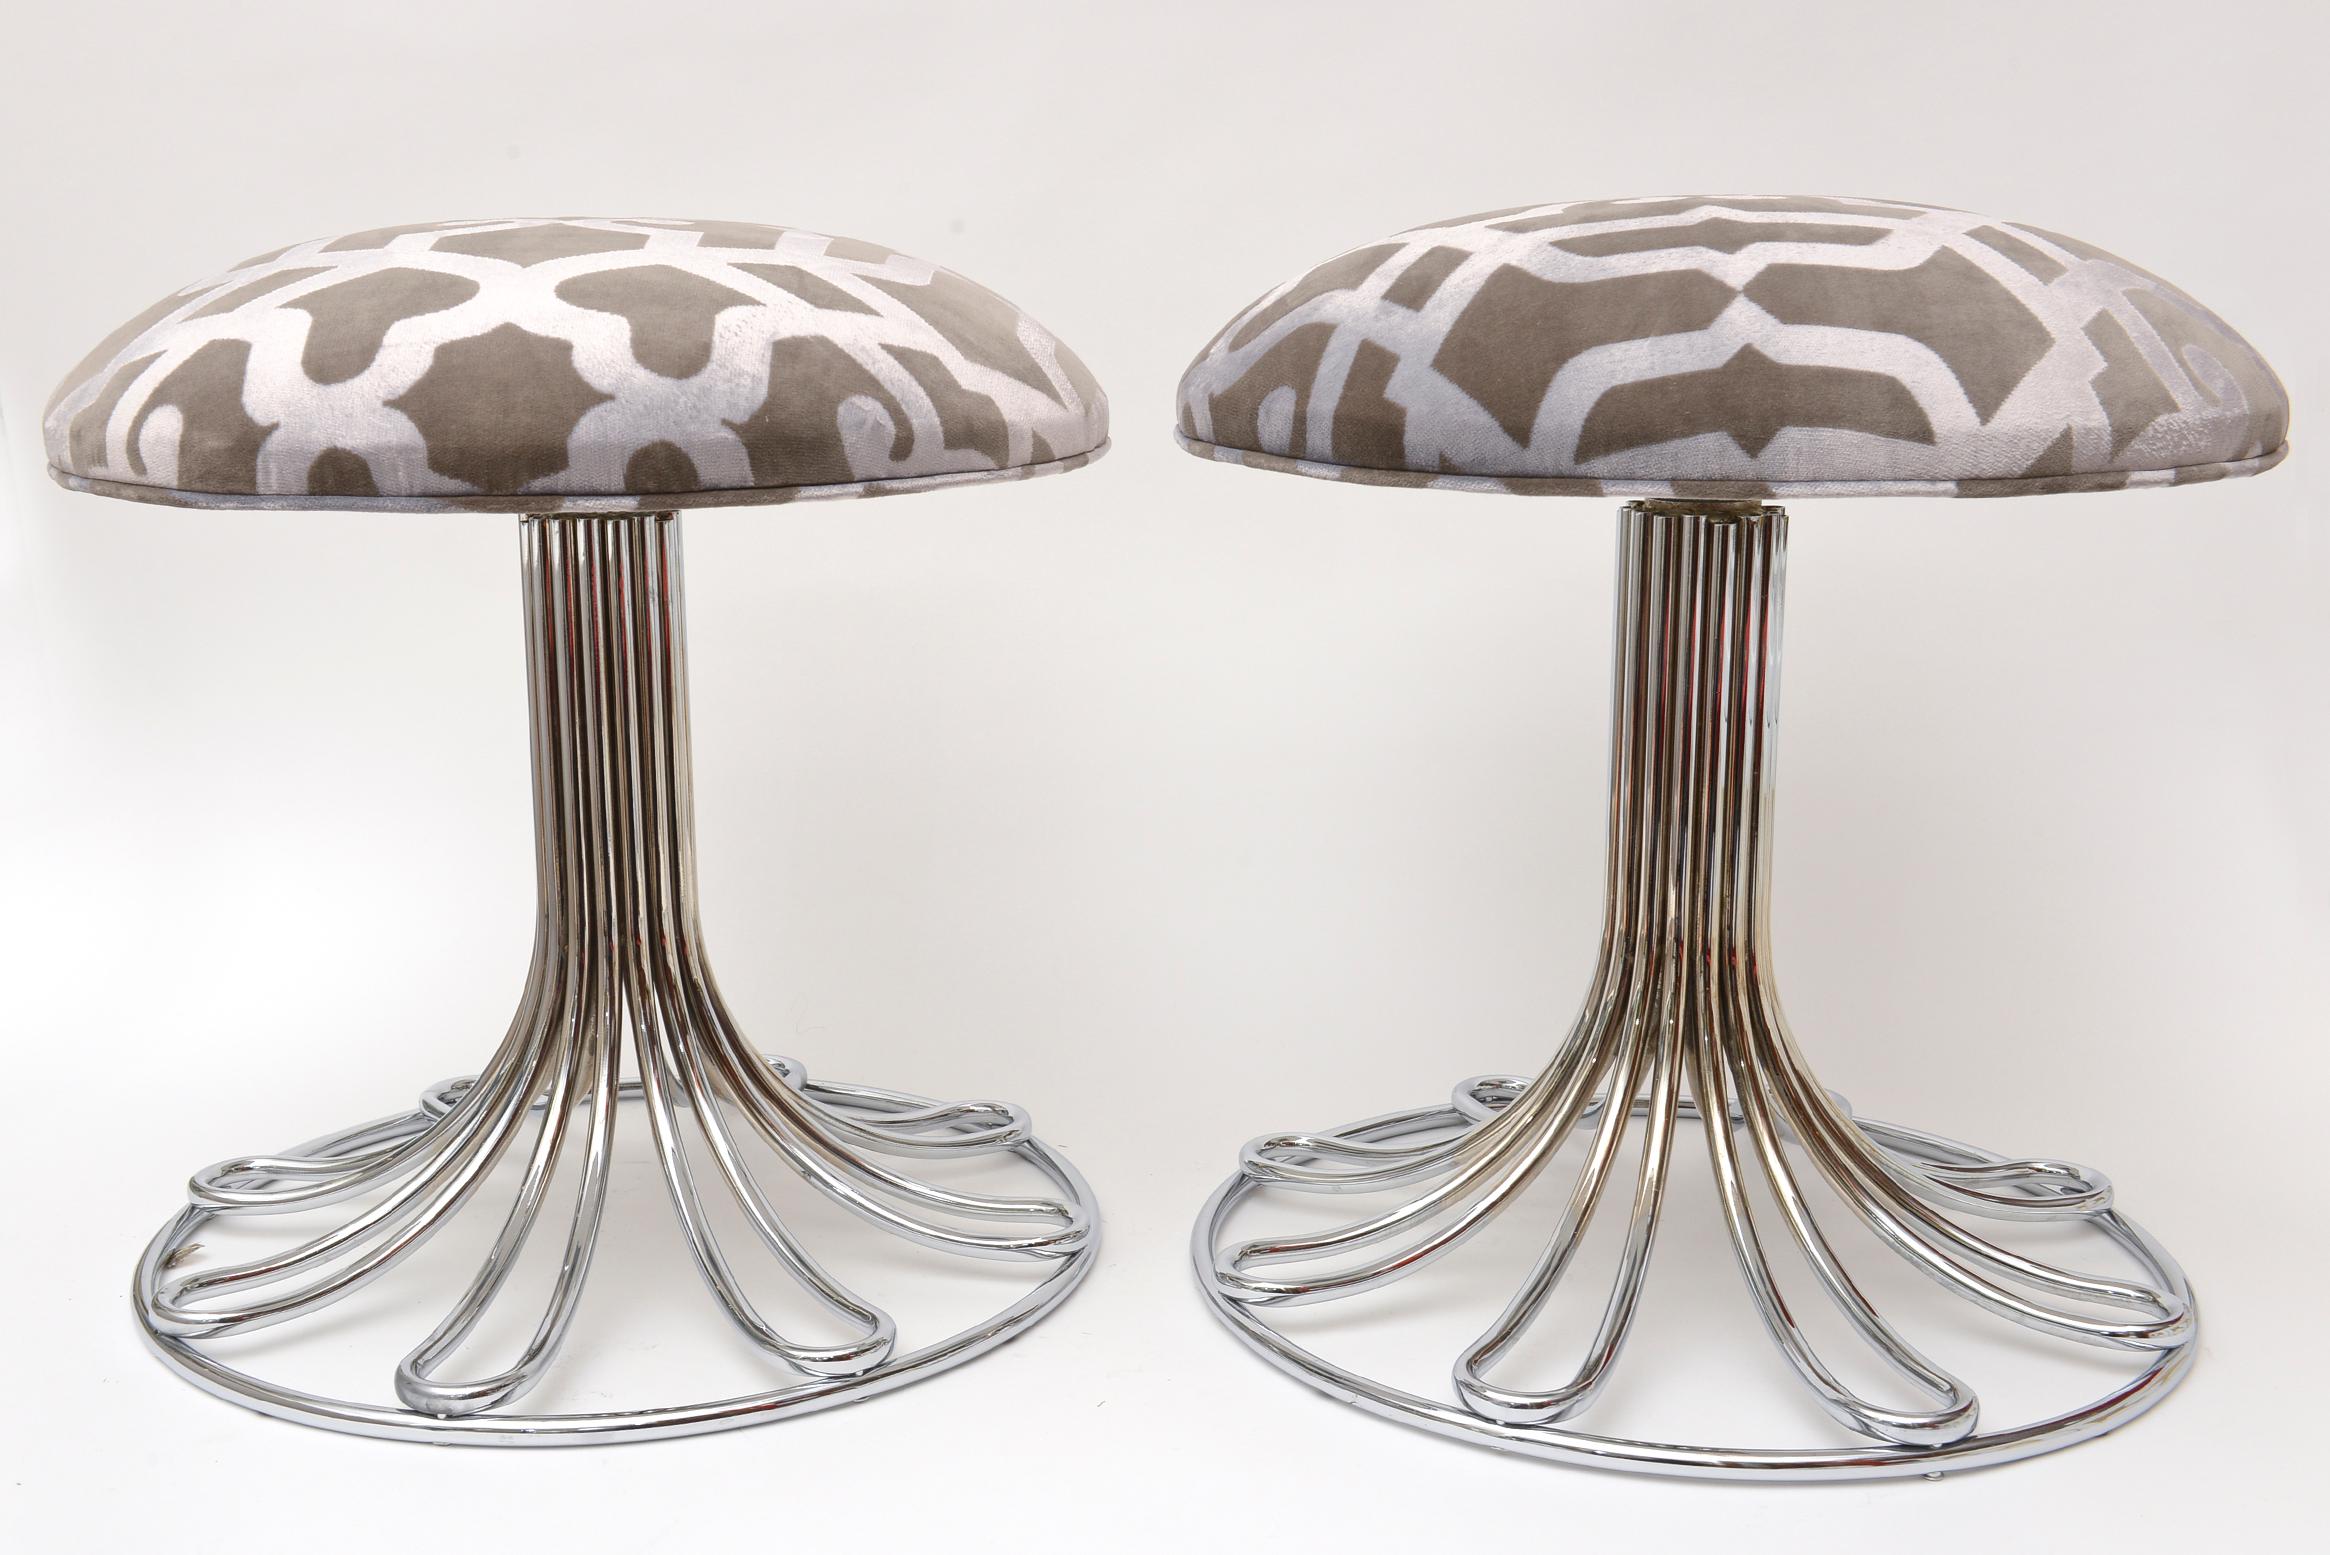 This wonderful pair of vintage 1960s Gastone Rinaldi nickel silver and grey and silver velvet upholstered stools, footstools or small benches are Italian. They have a domed top. The fabric is transitional and a combination of grey and silver. The